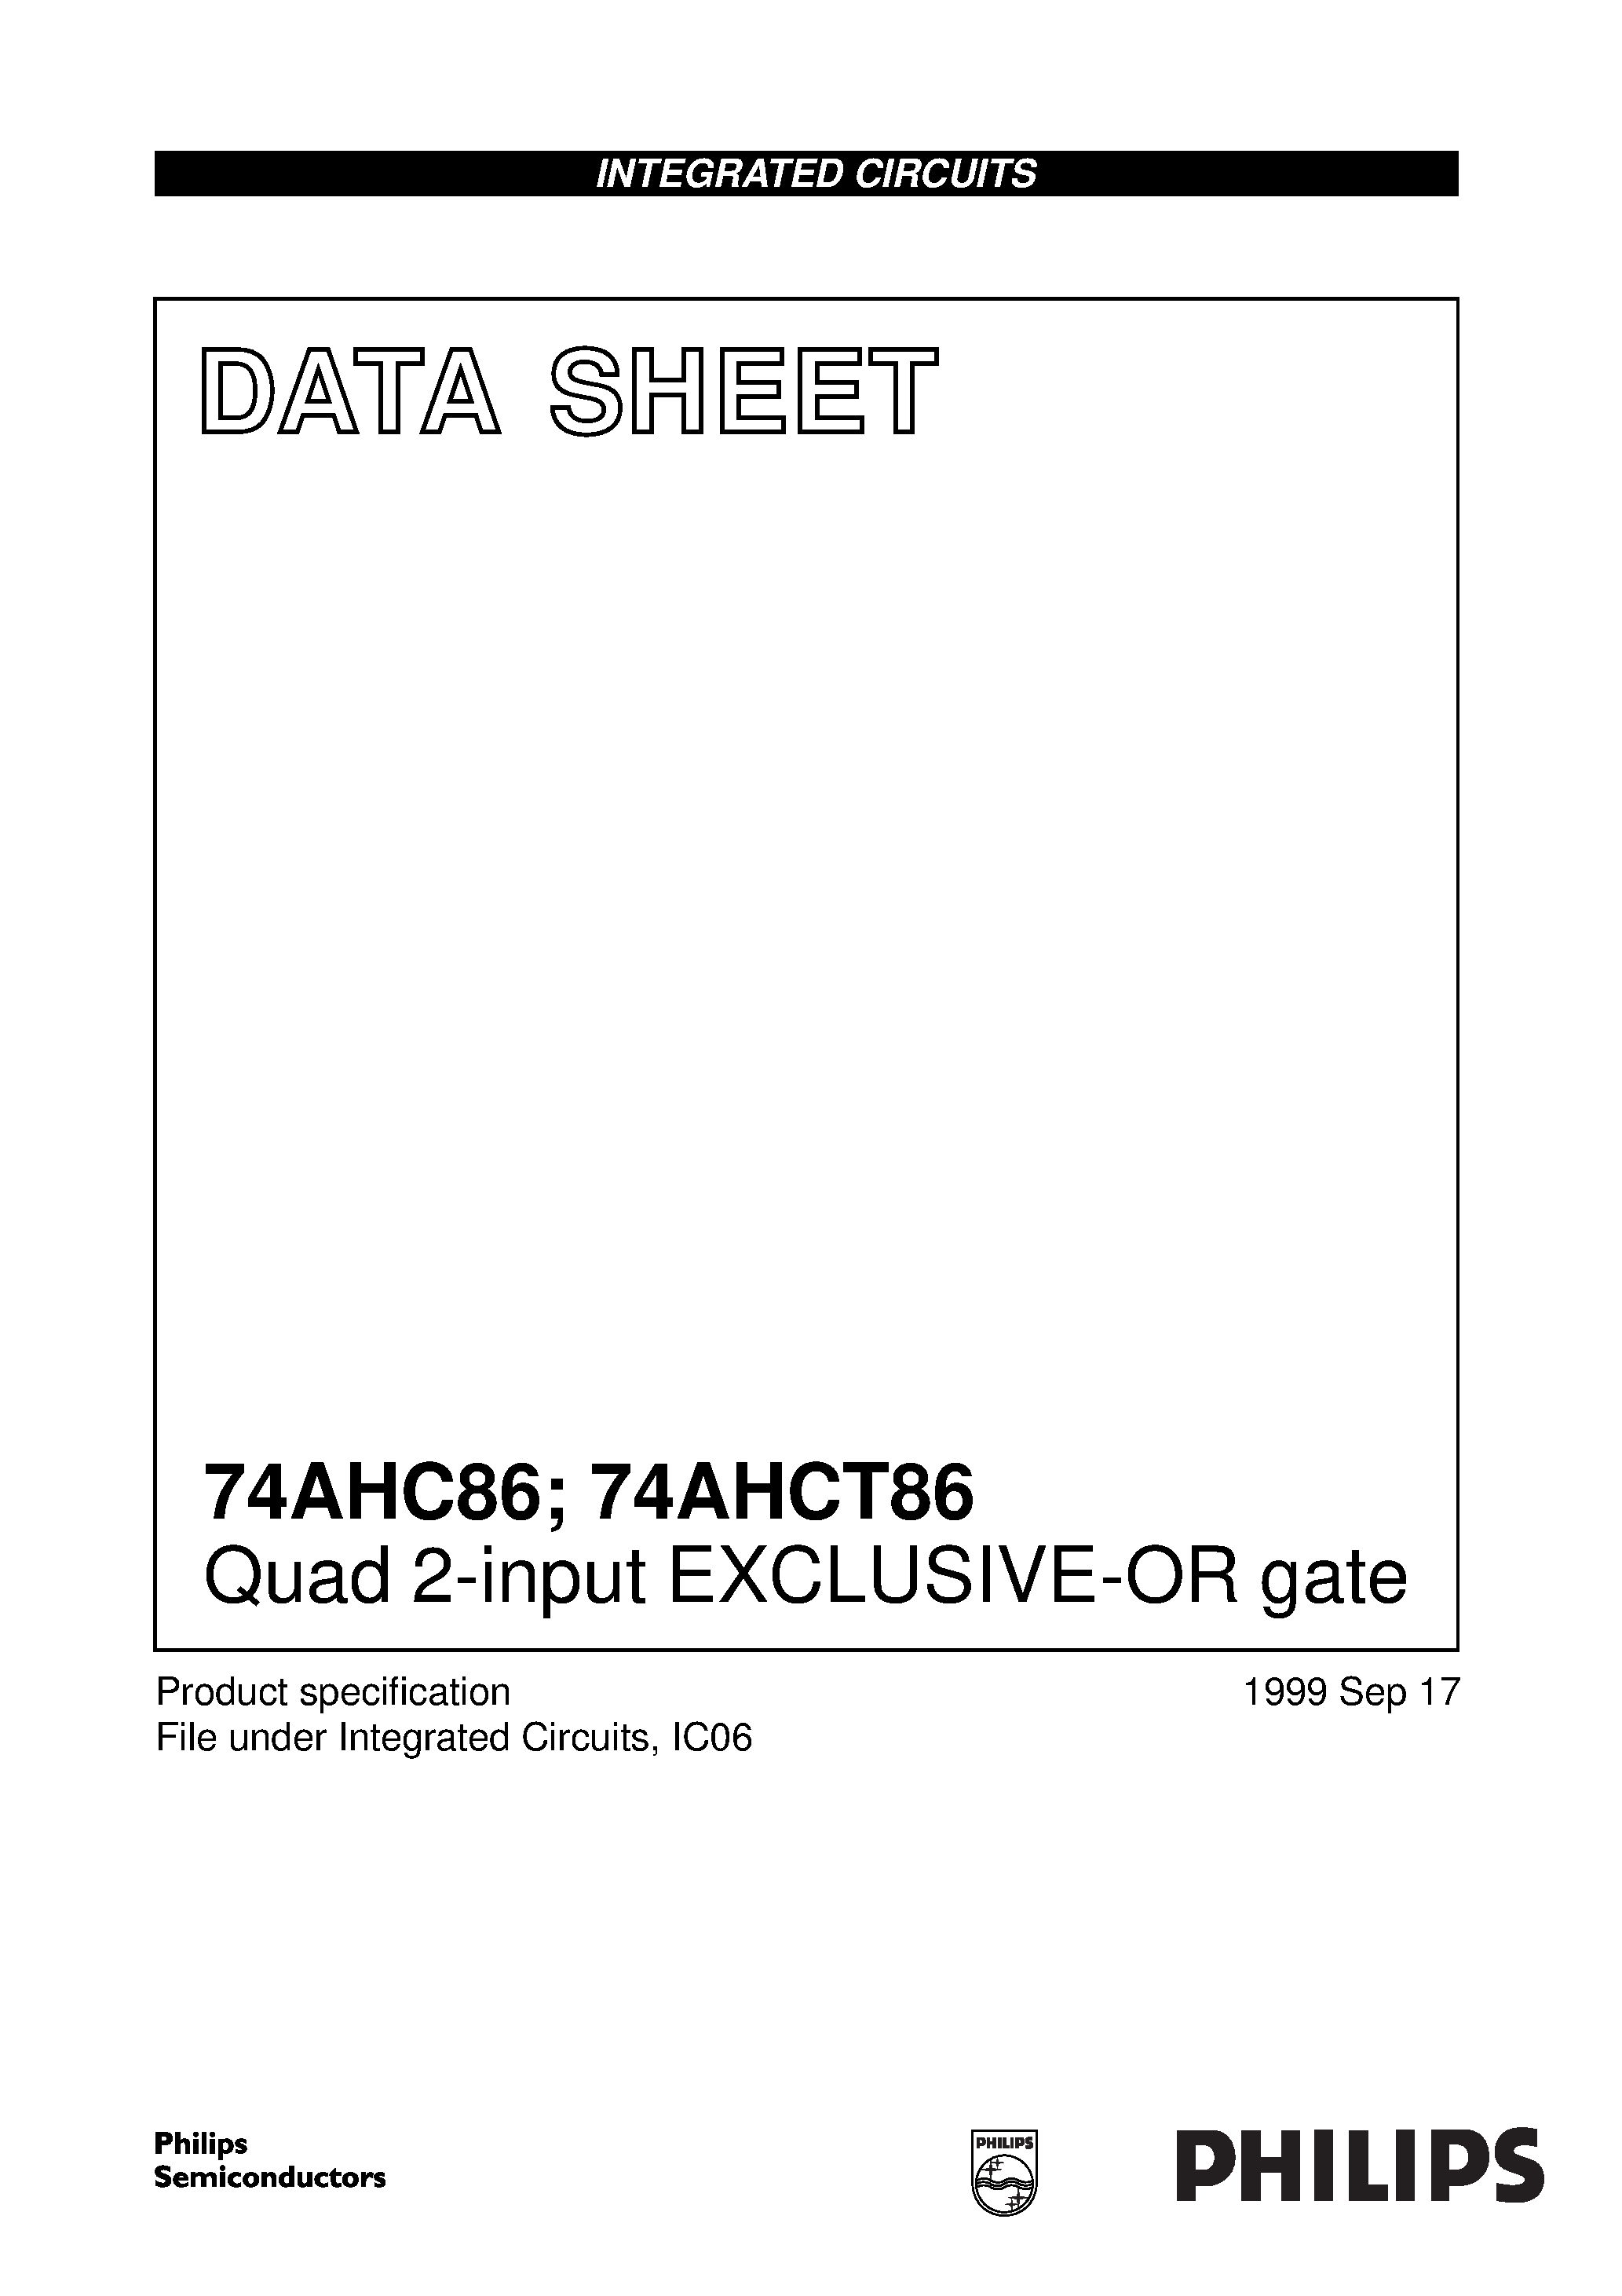 Datasheet 74AHCT86PW - Quad 2-input EXCLUSIVE-OR gate page 1